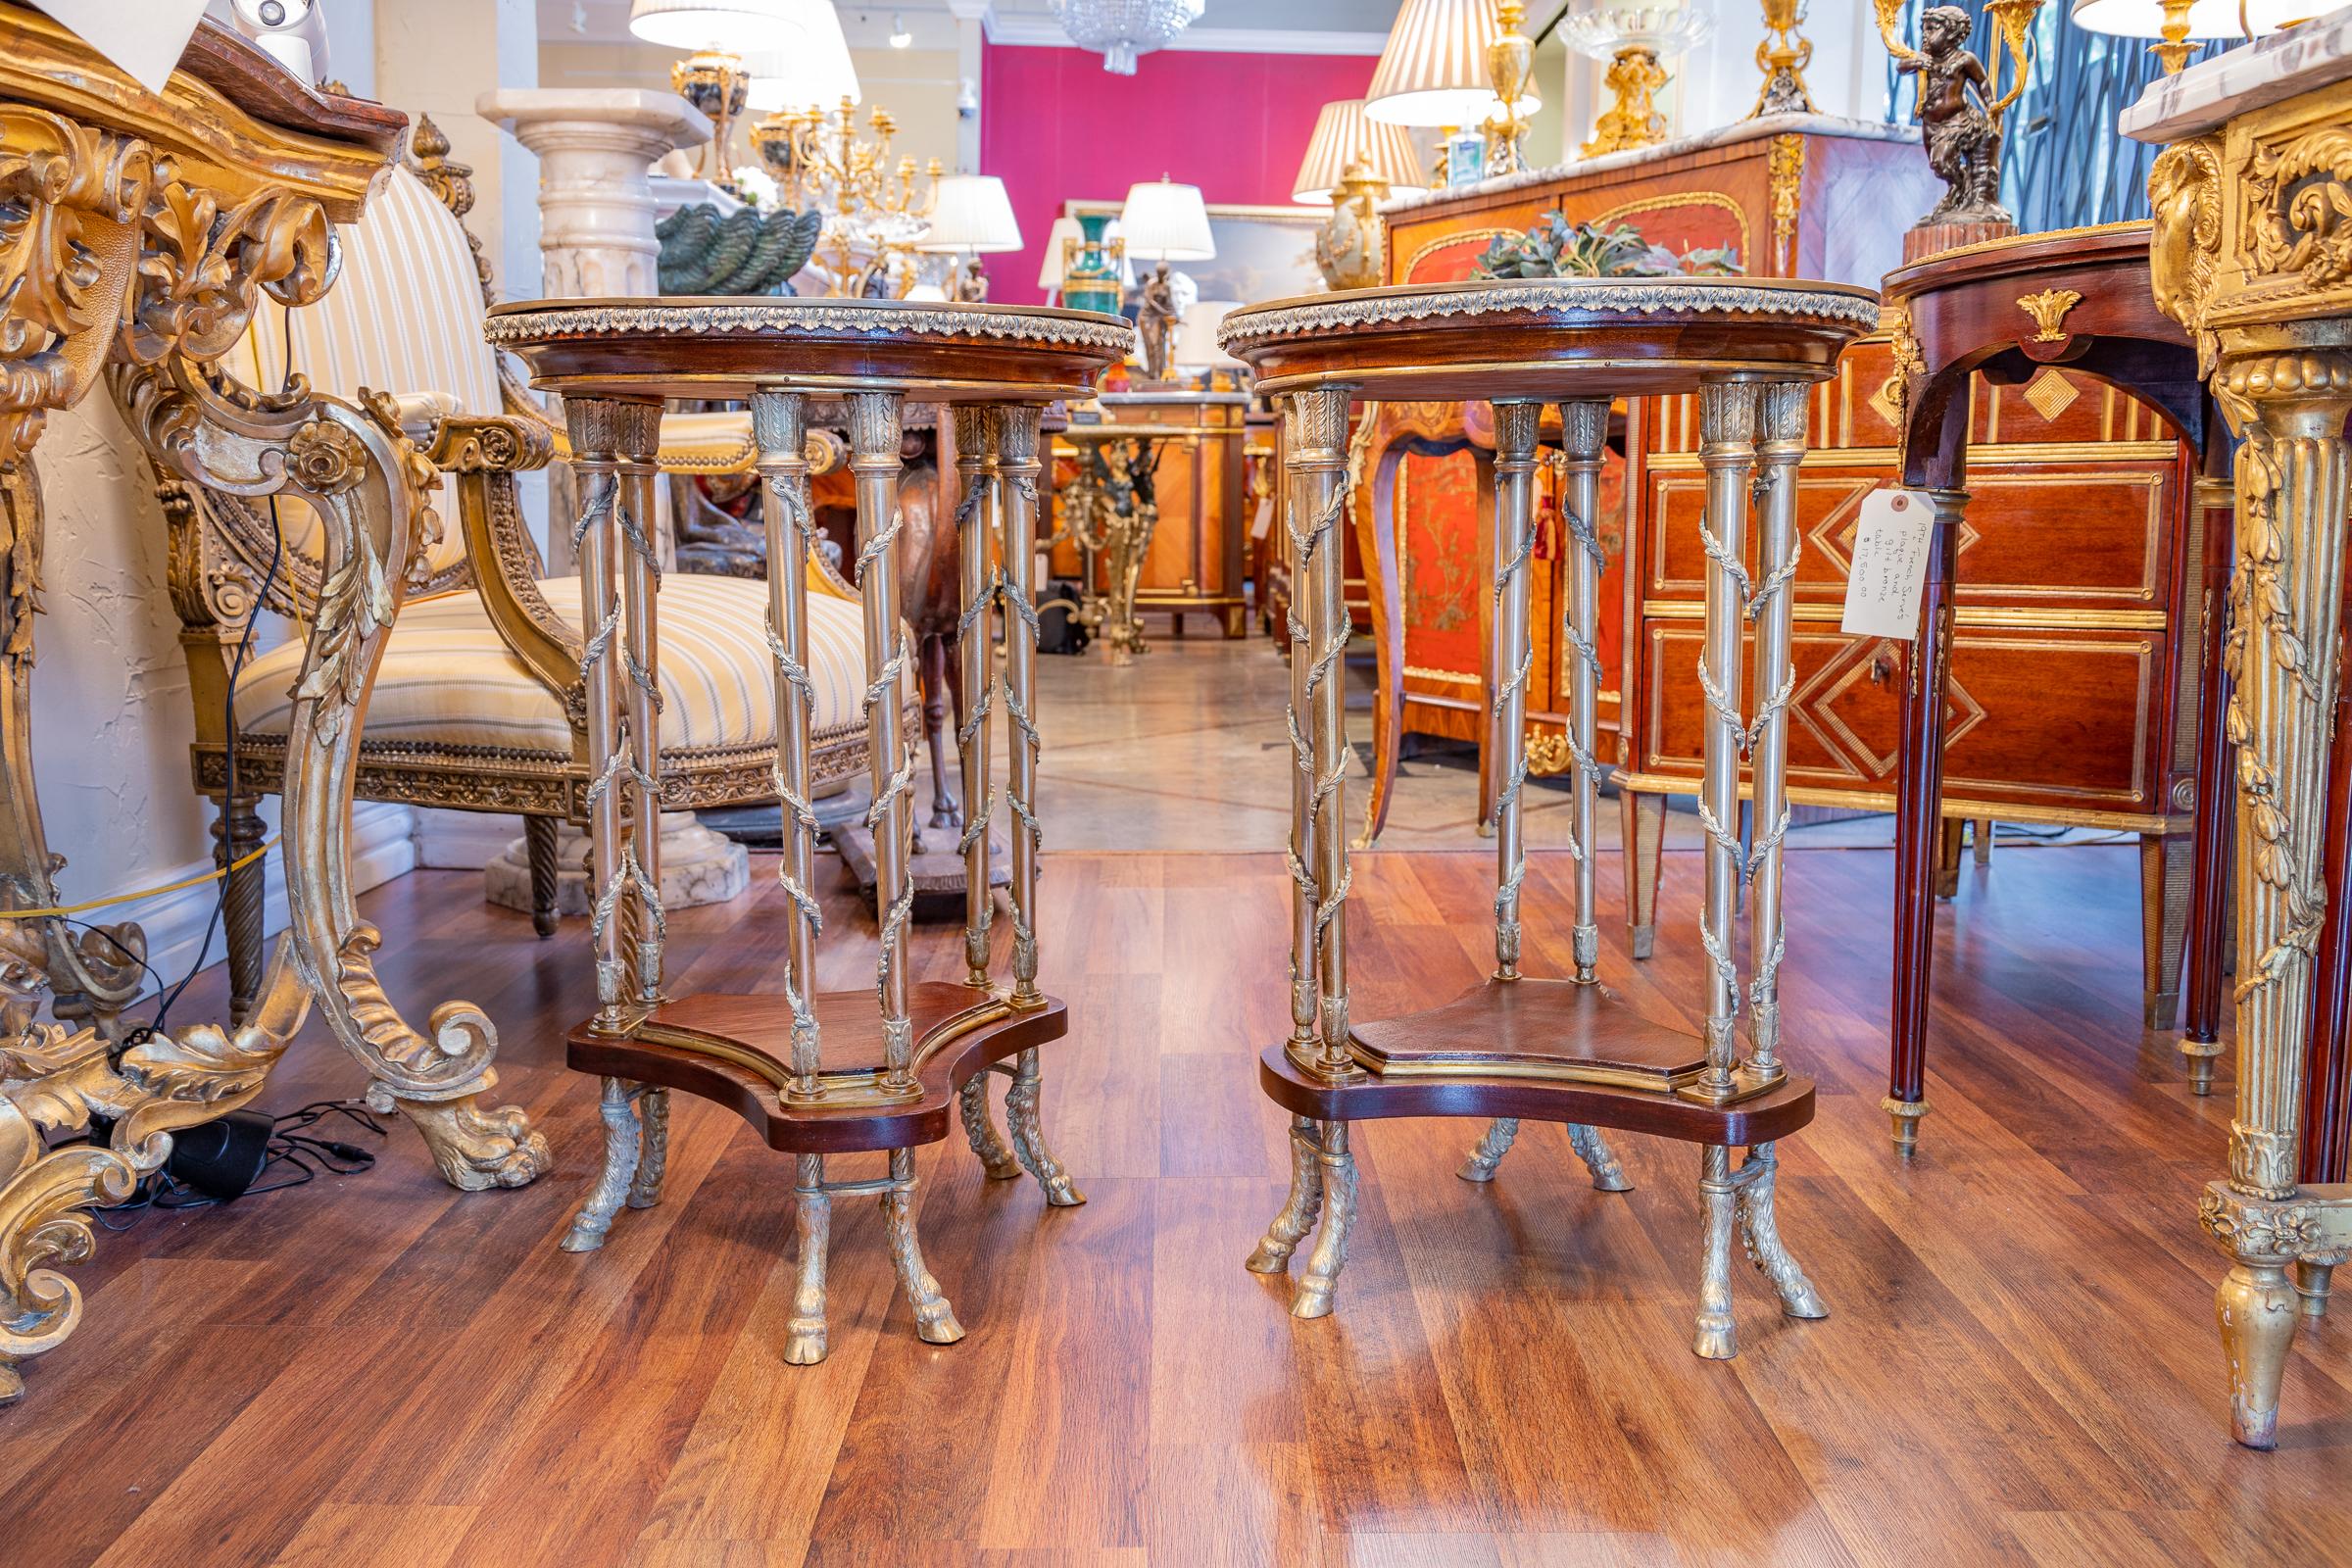 A fine pair of late 19th century French gueridon tables with gilt bronze columns and hoofed feet. Marble tops. After Adam Weisweiler.